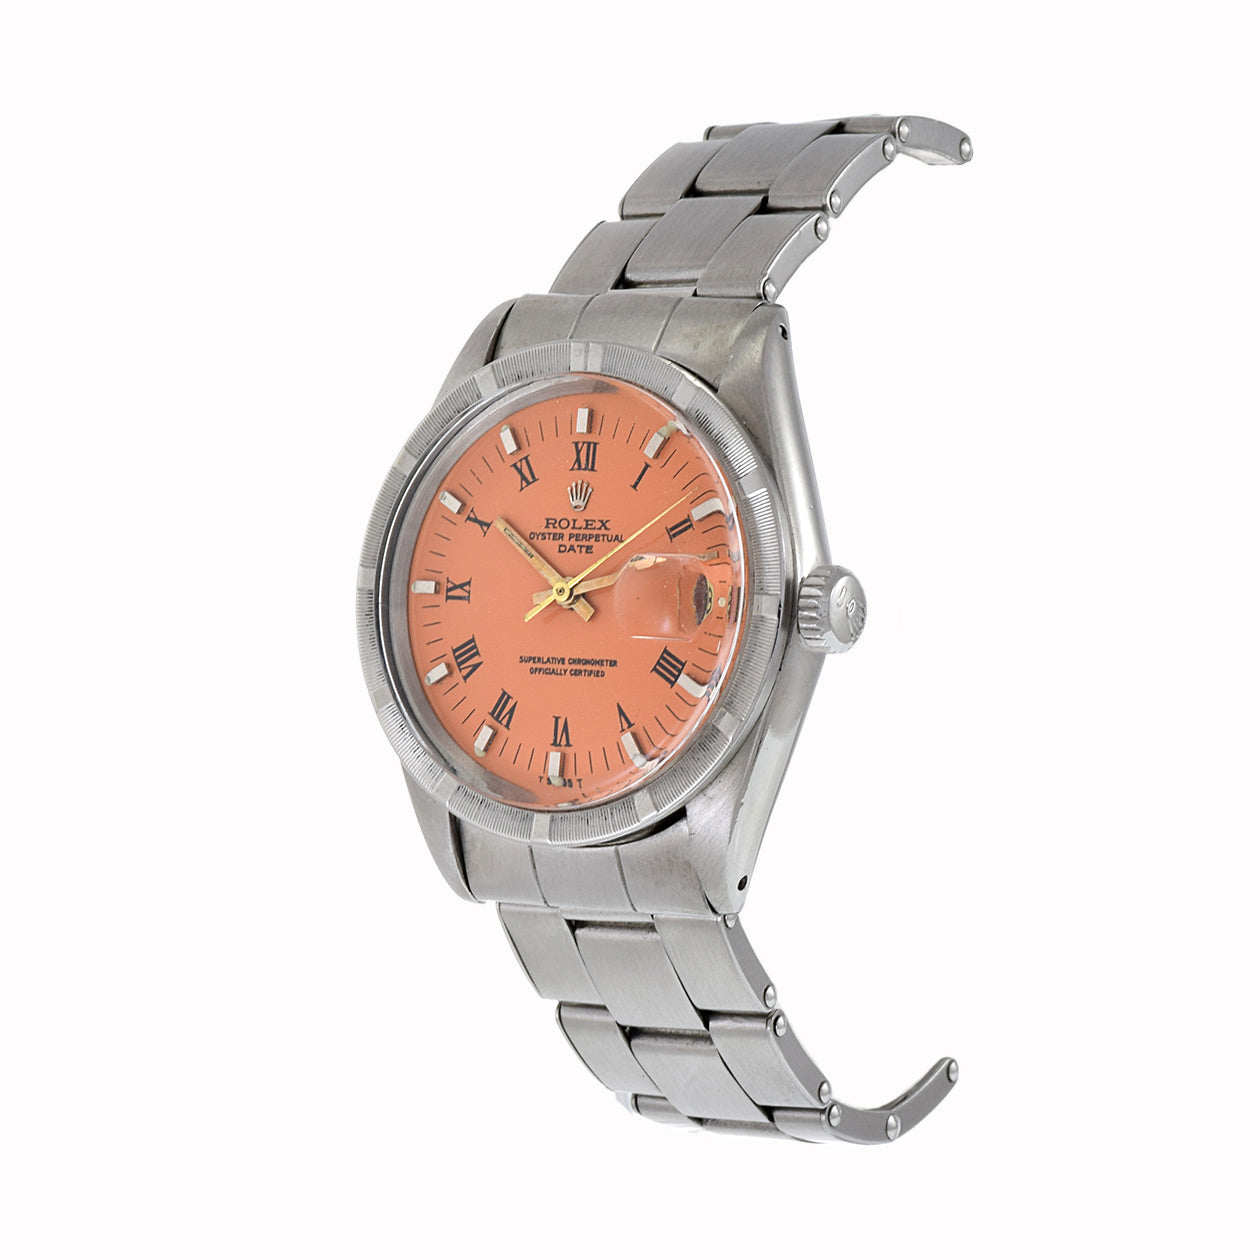 Vintage 1965 Rolex Oyster Perpetual Date Reference 1501 Custom Orange Dial Automatic Watch